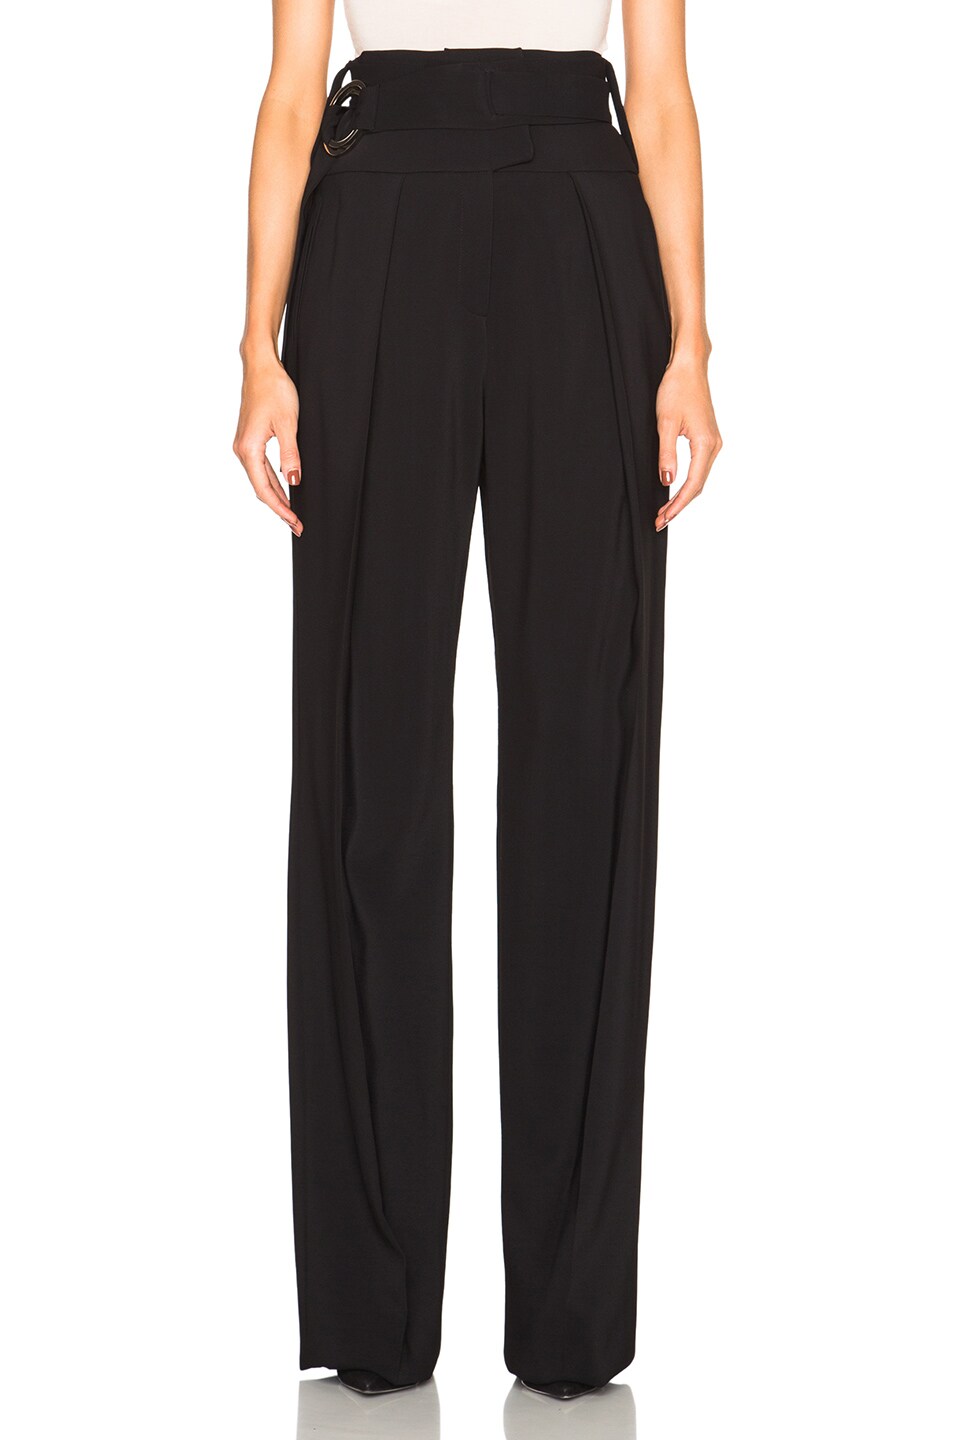 Image 1 of Preen by Thornton Bregazzi Lexie Trousers with Belt in Black